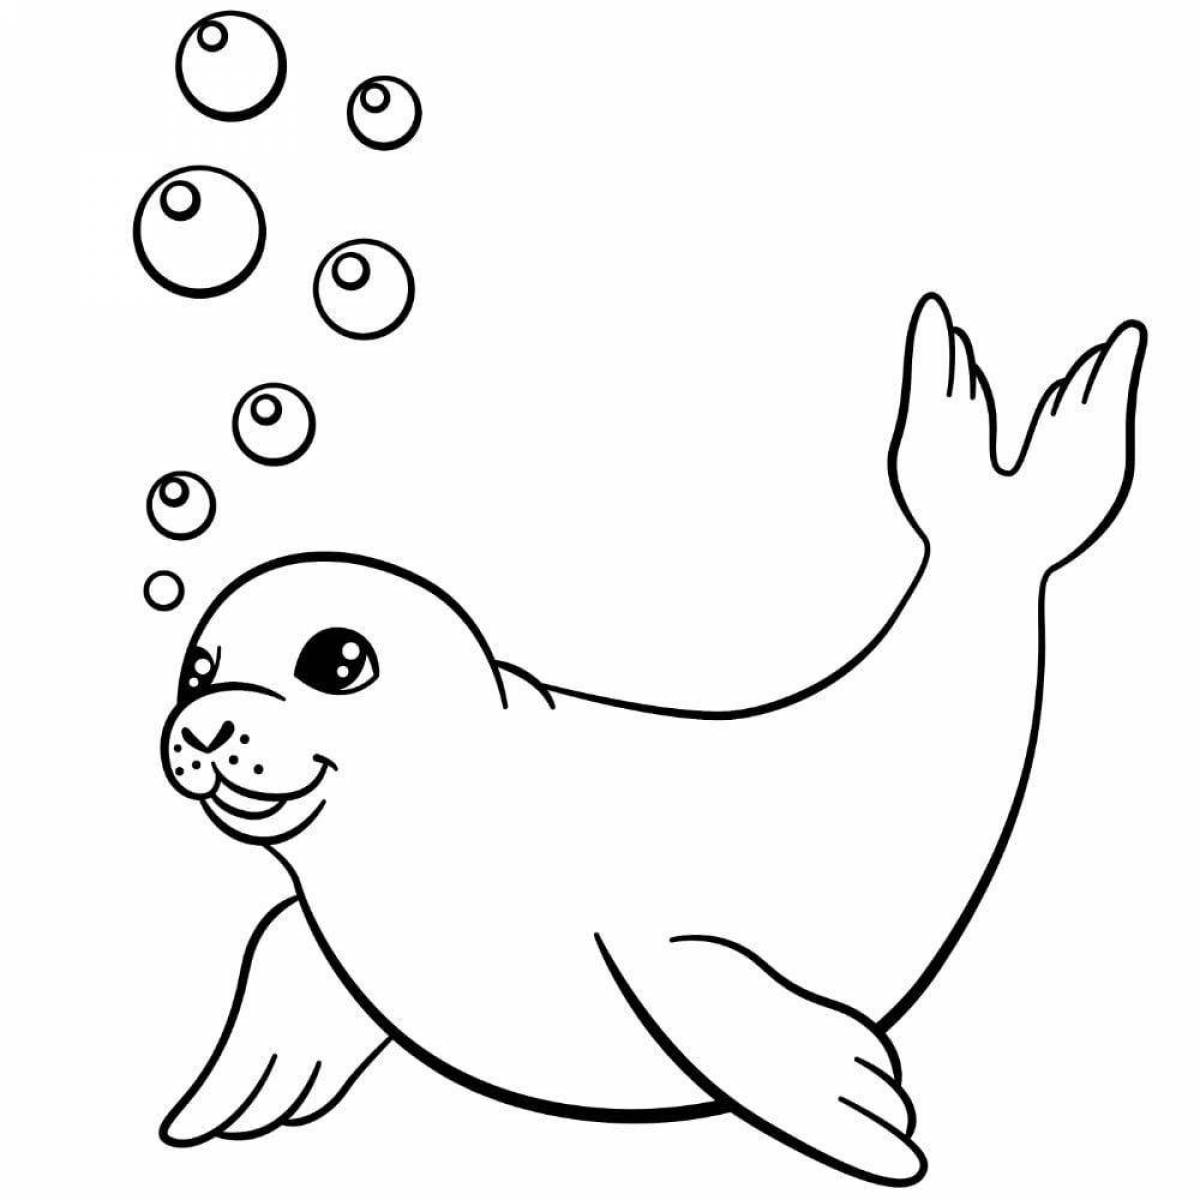 Colourful seal coloring book for kids